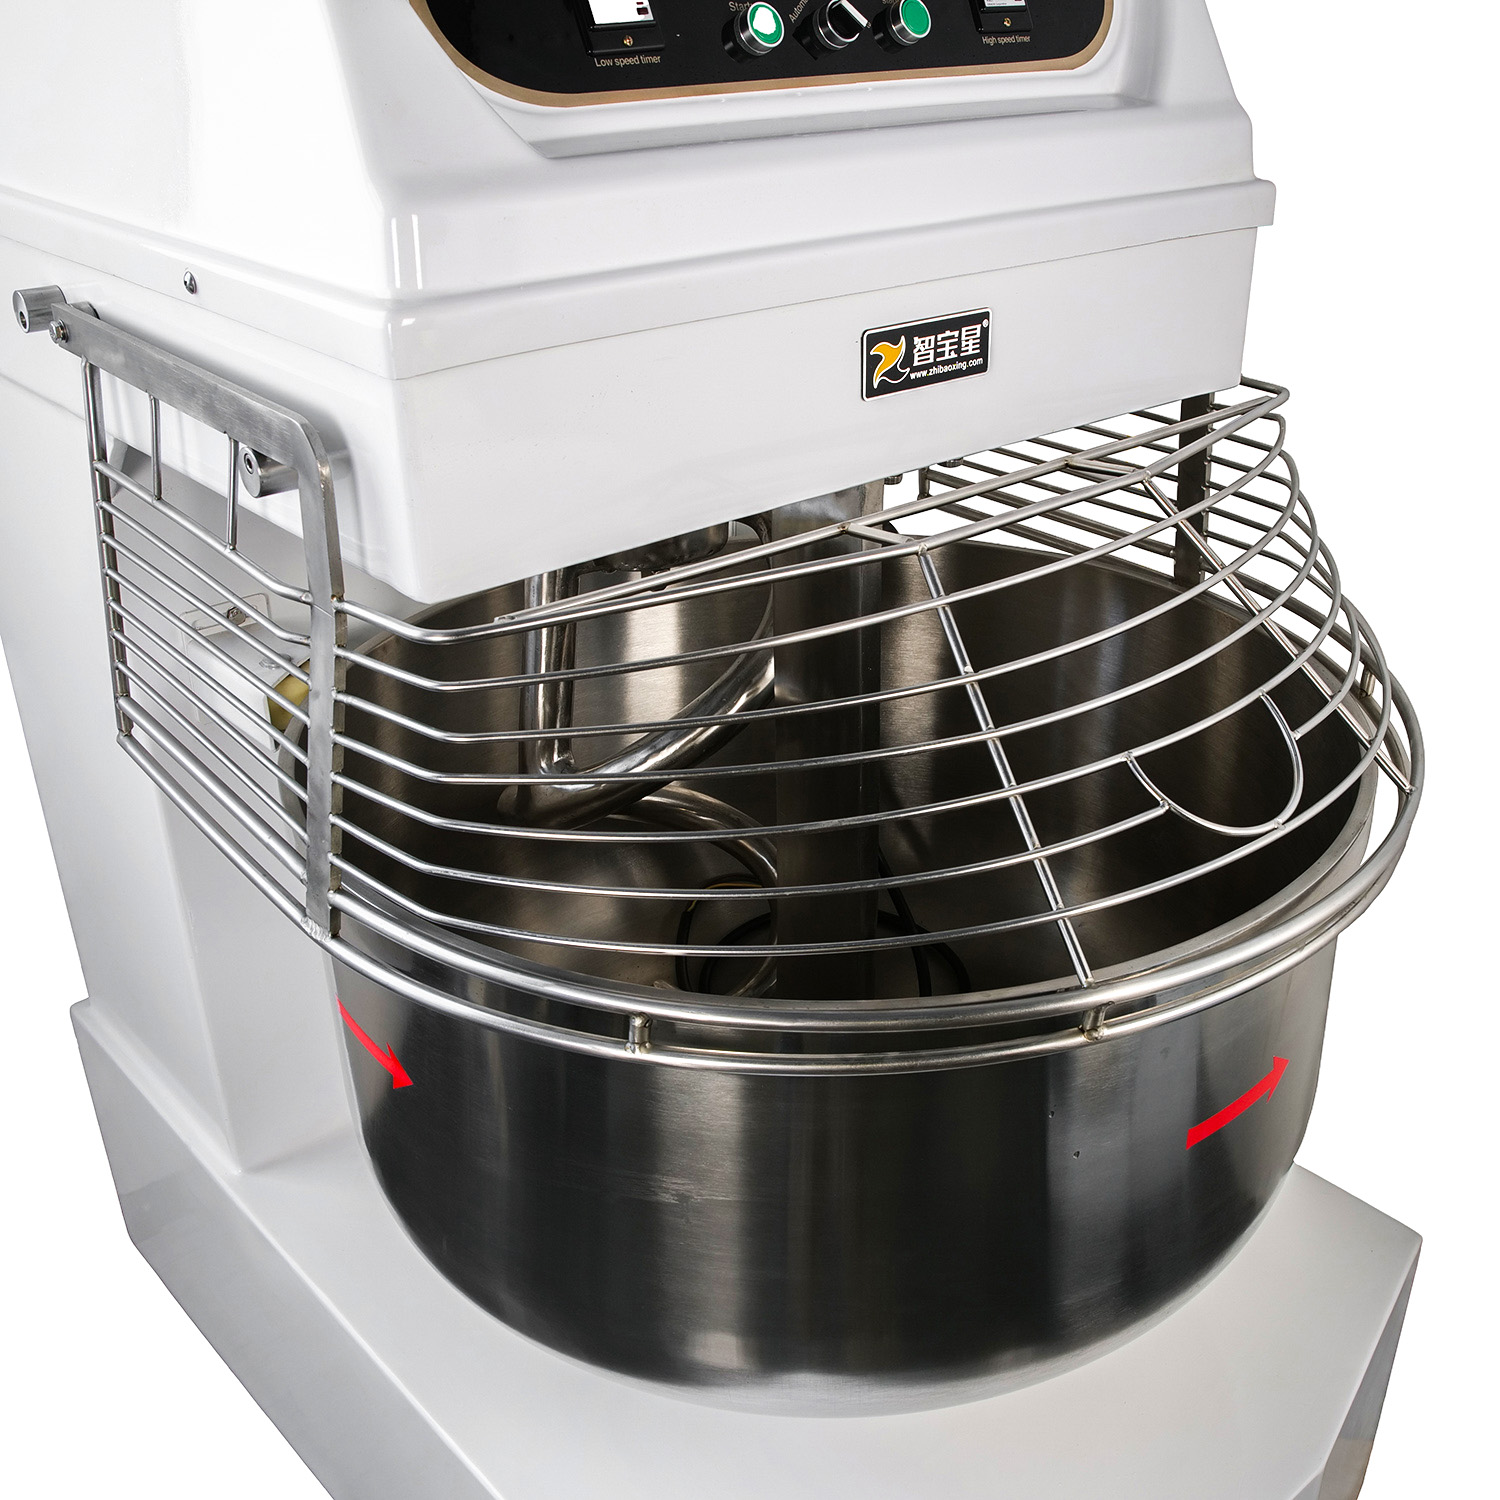 75kg flour capacity 200L Spiral Dough Mixer Bread Making Machine Bakery Equipment With CE Certificate